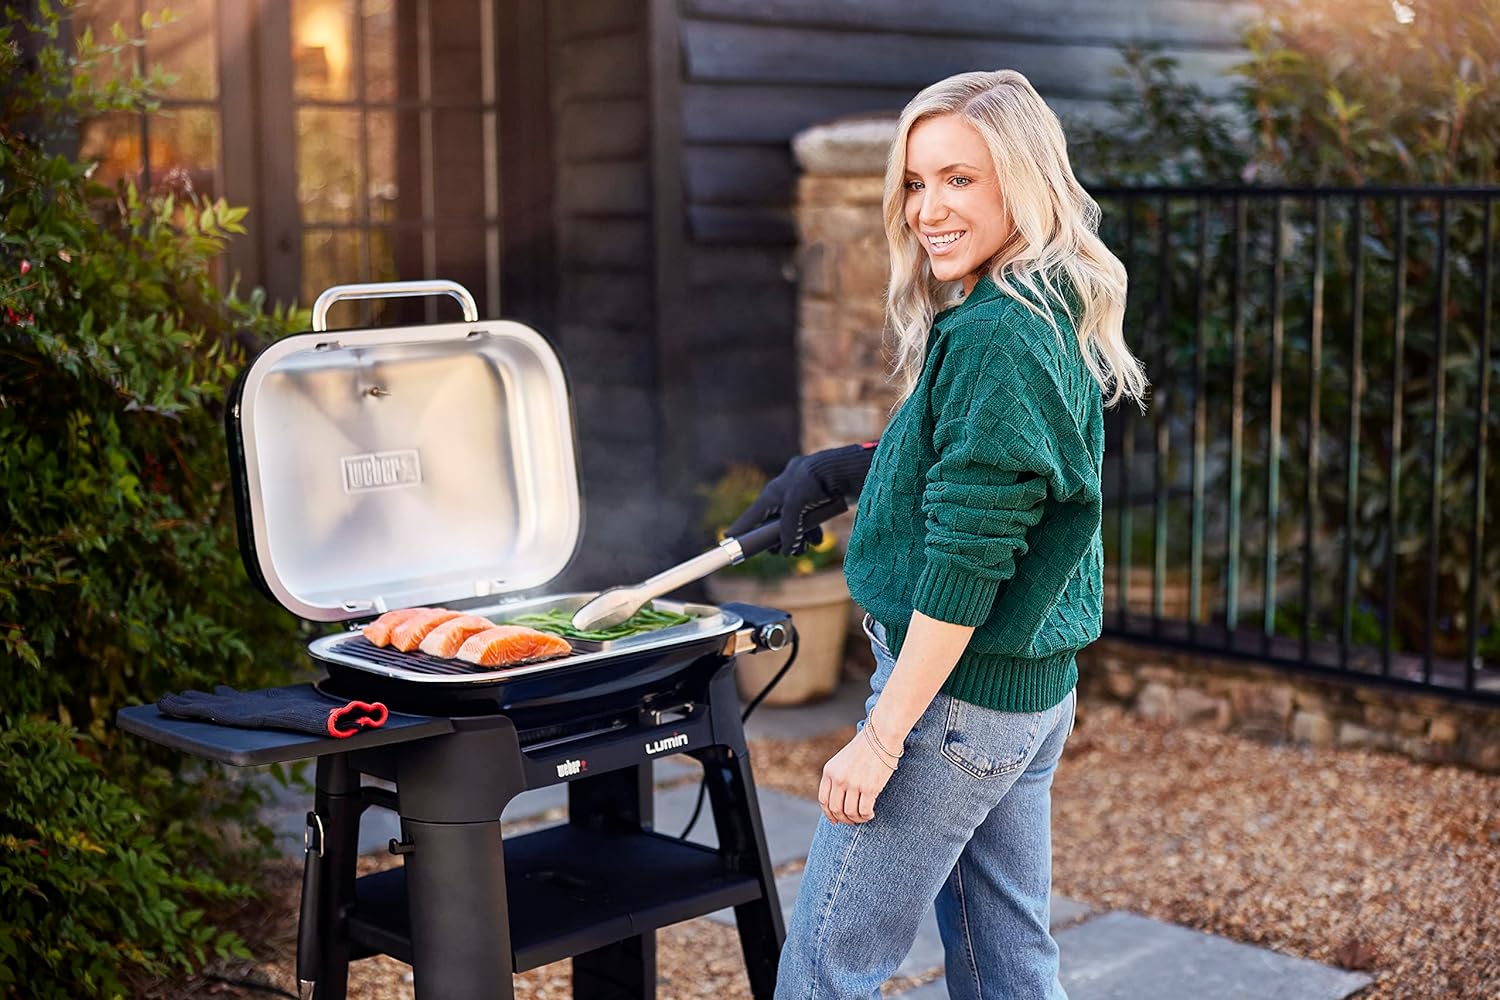 Weber Lumin Compact Electric Grill Stand, Black - Weber Lumin Compact Electric Grill Stand Review